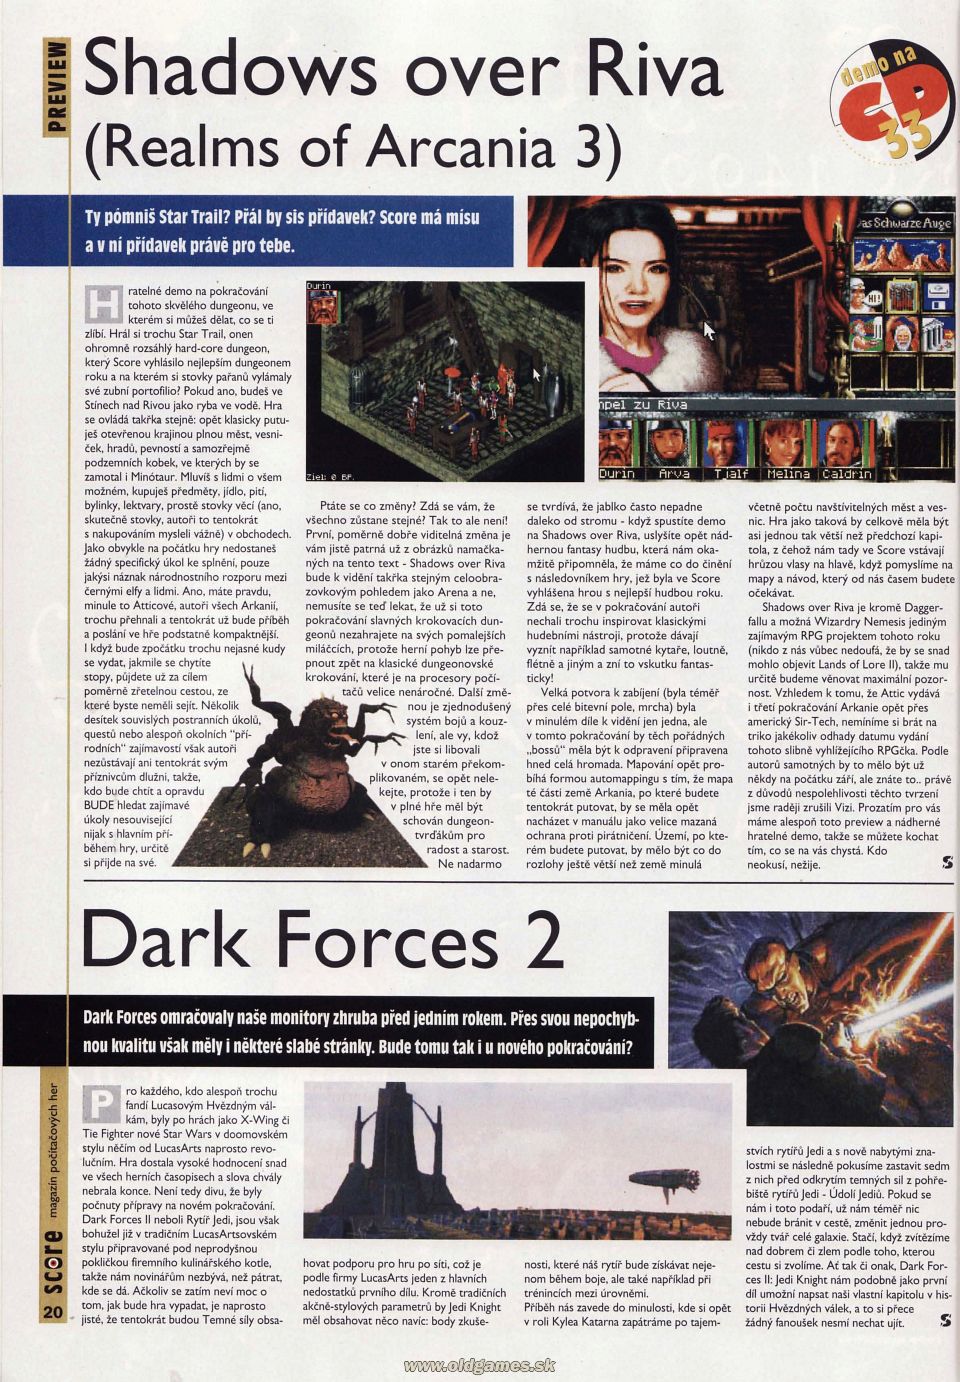 Preview: Shadows over RIva, Dark Forces 2